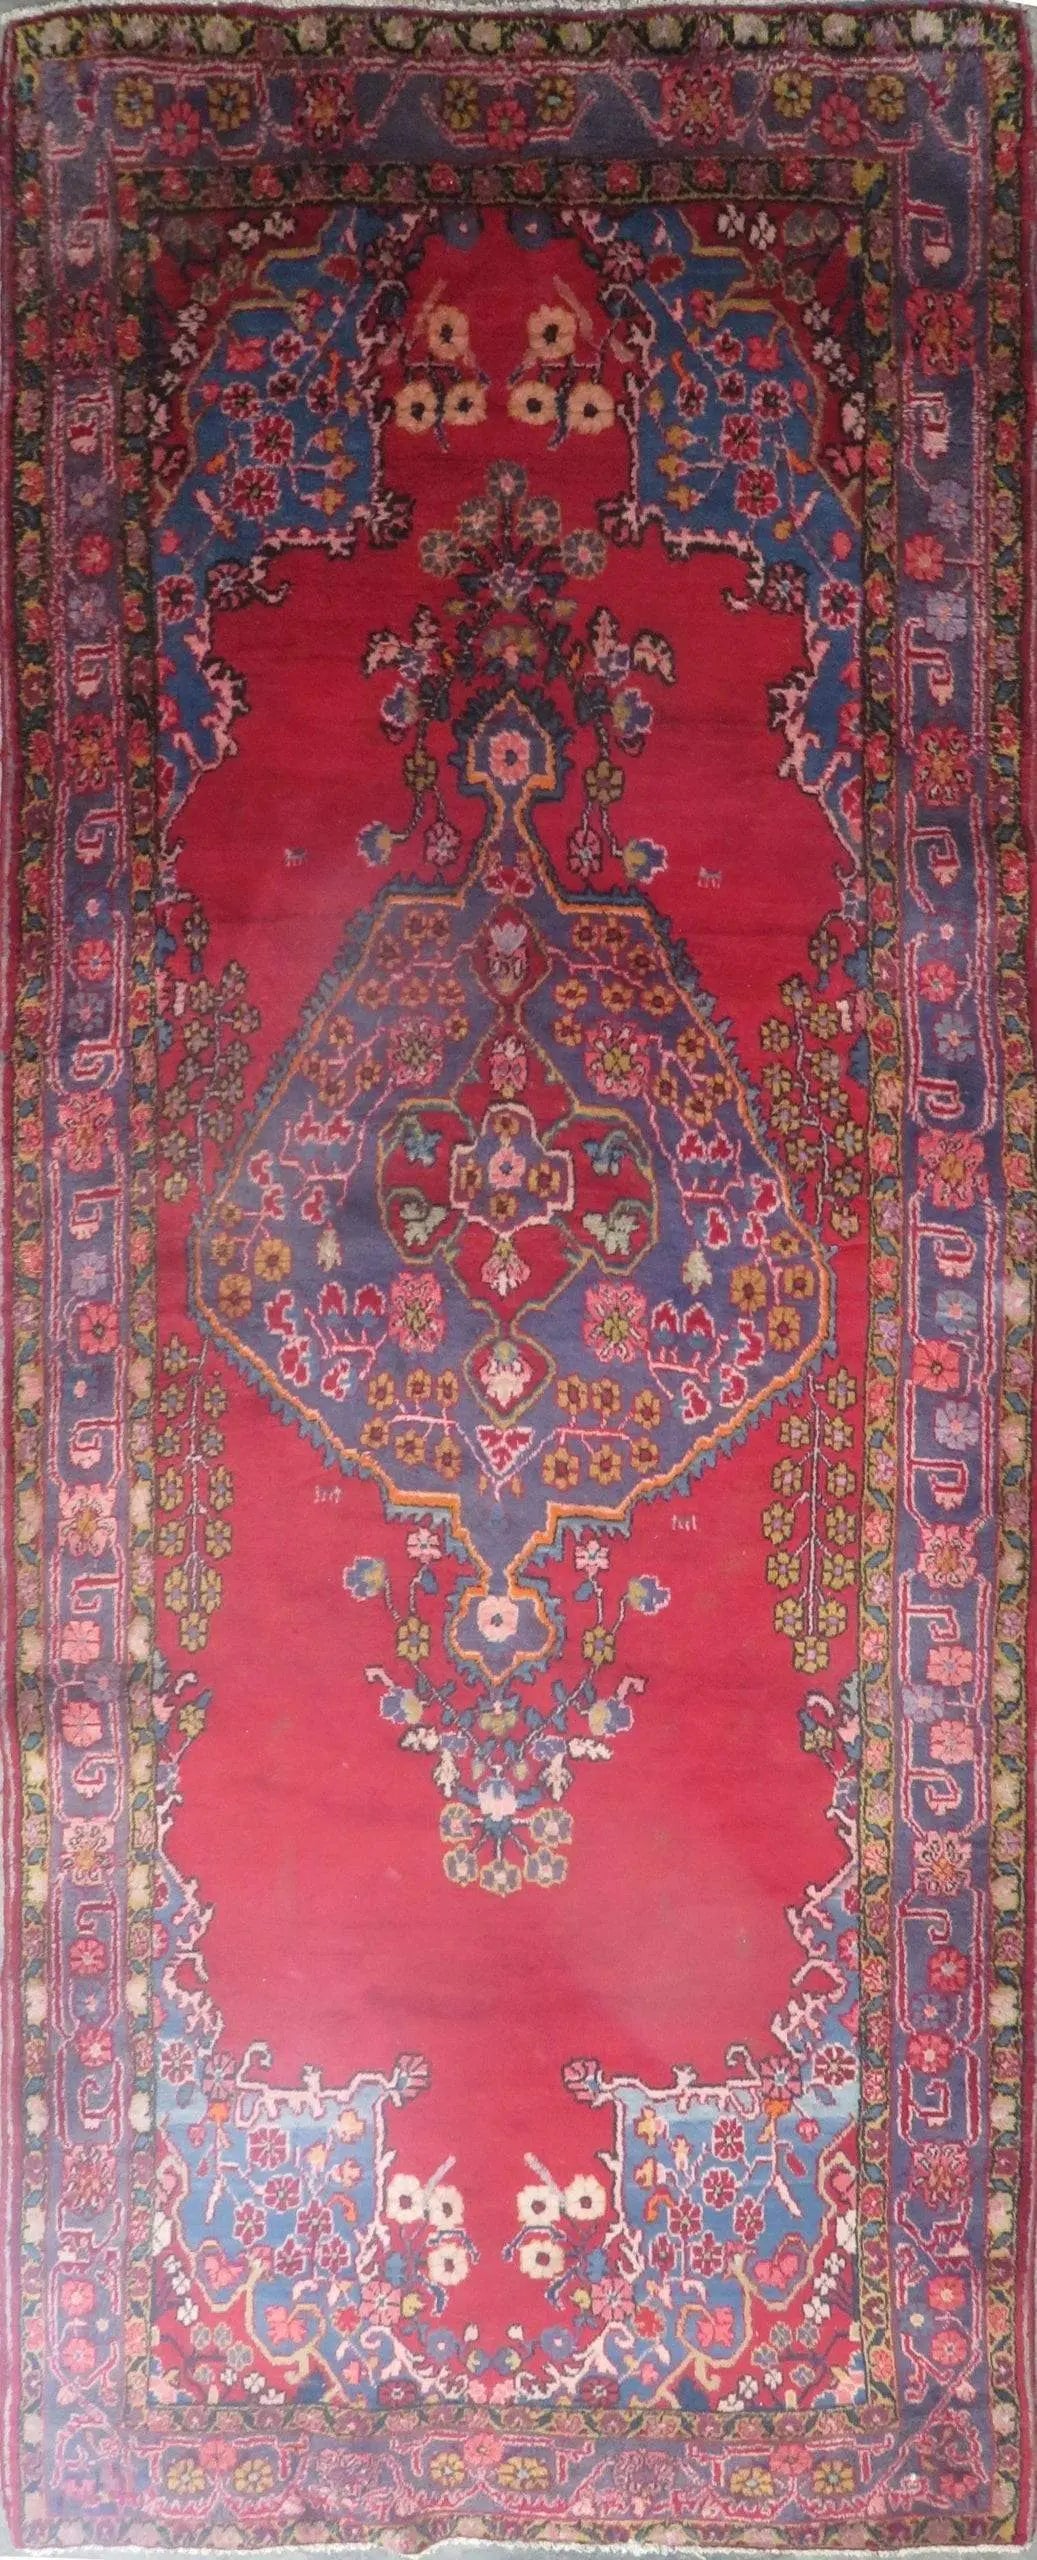 Hand-Knotted Persian Wool Rug _ Luxurious Vintage Design, 8'1" x 4'6", Artisan Crafted